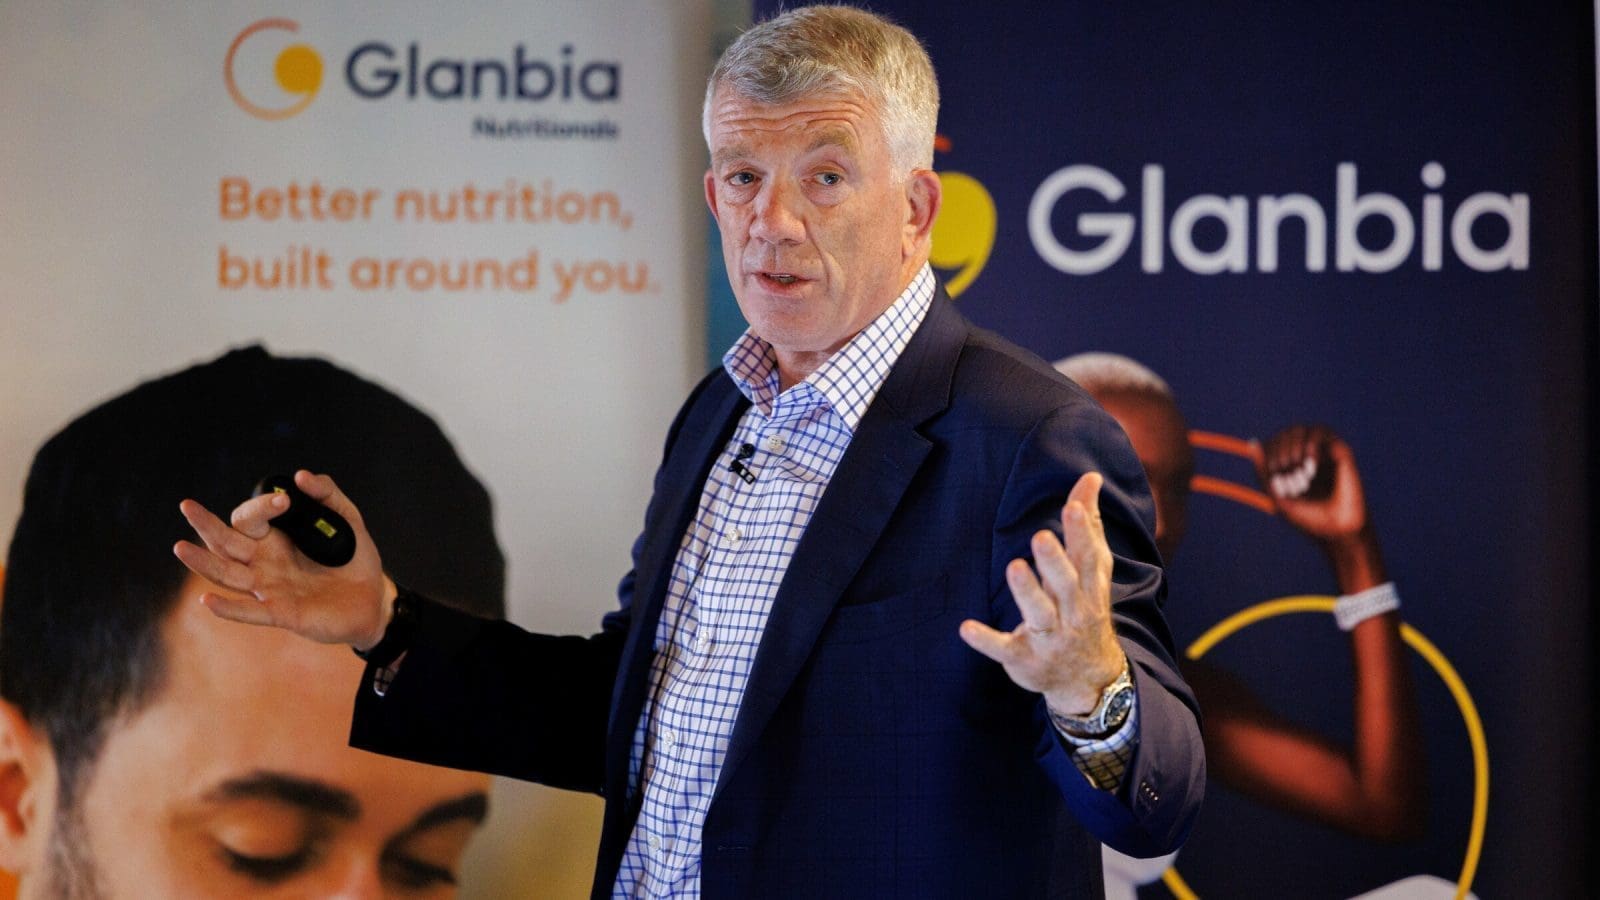 Glanbia names Hugh McGuire as next CEO, raises earning guidance after profits exceed expectation